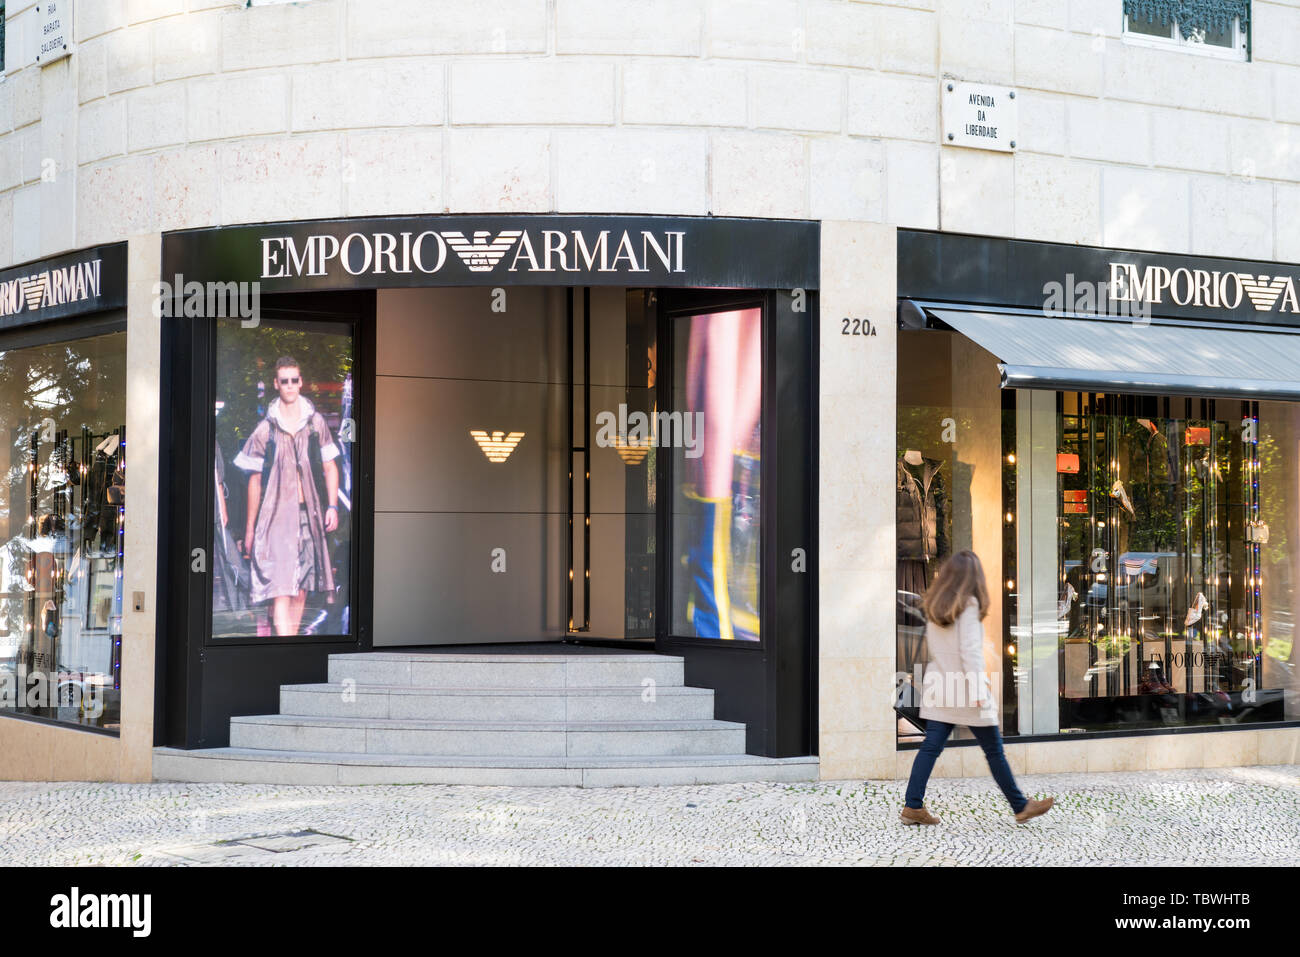 Armani Shop Front High Resolution Stock Photography and Images - Alamy